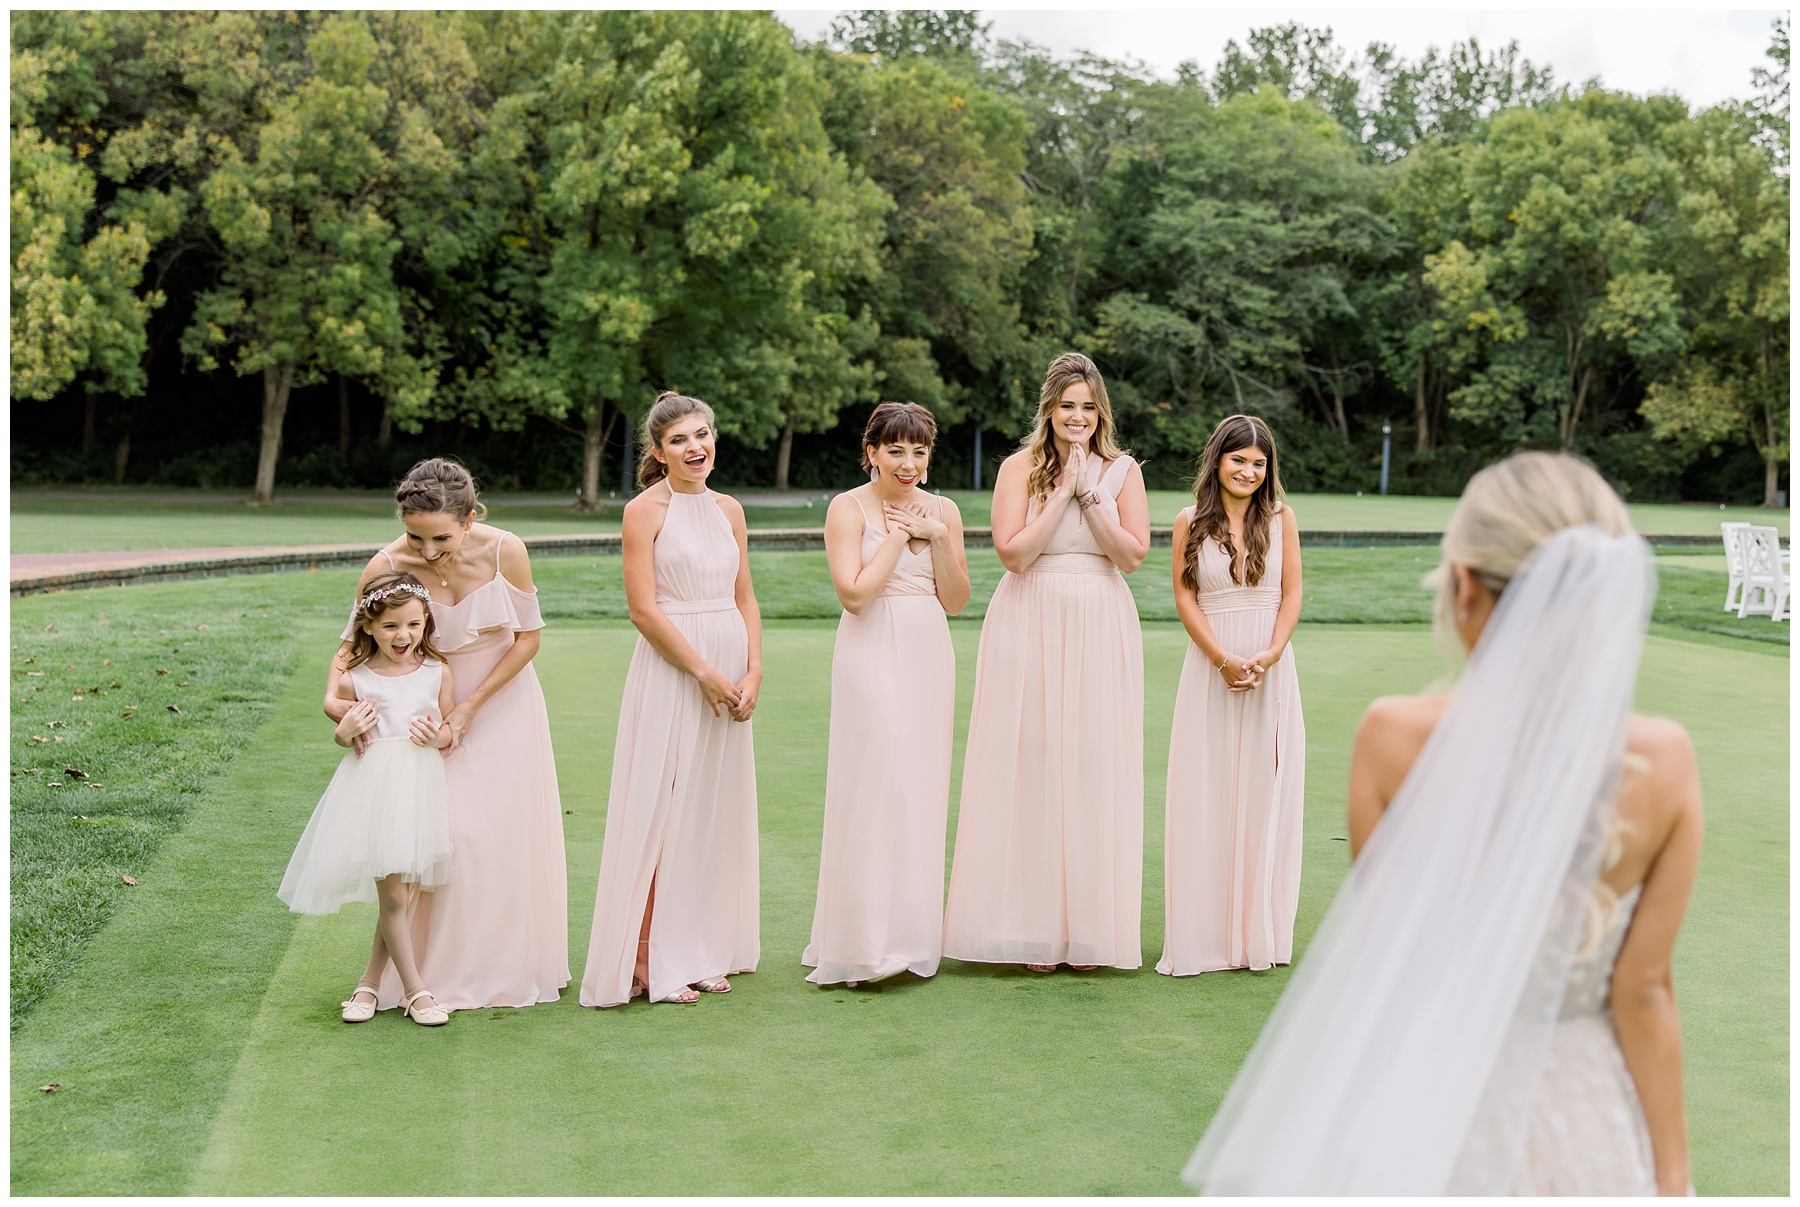 First look with bridesmaids at New Albany Country Club in Columbus Ohio. Amanda Eloise Photography